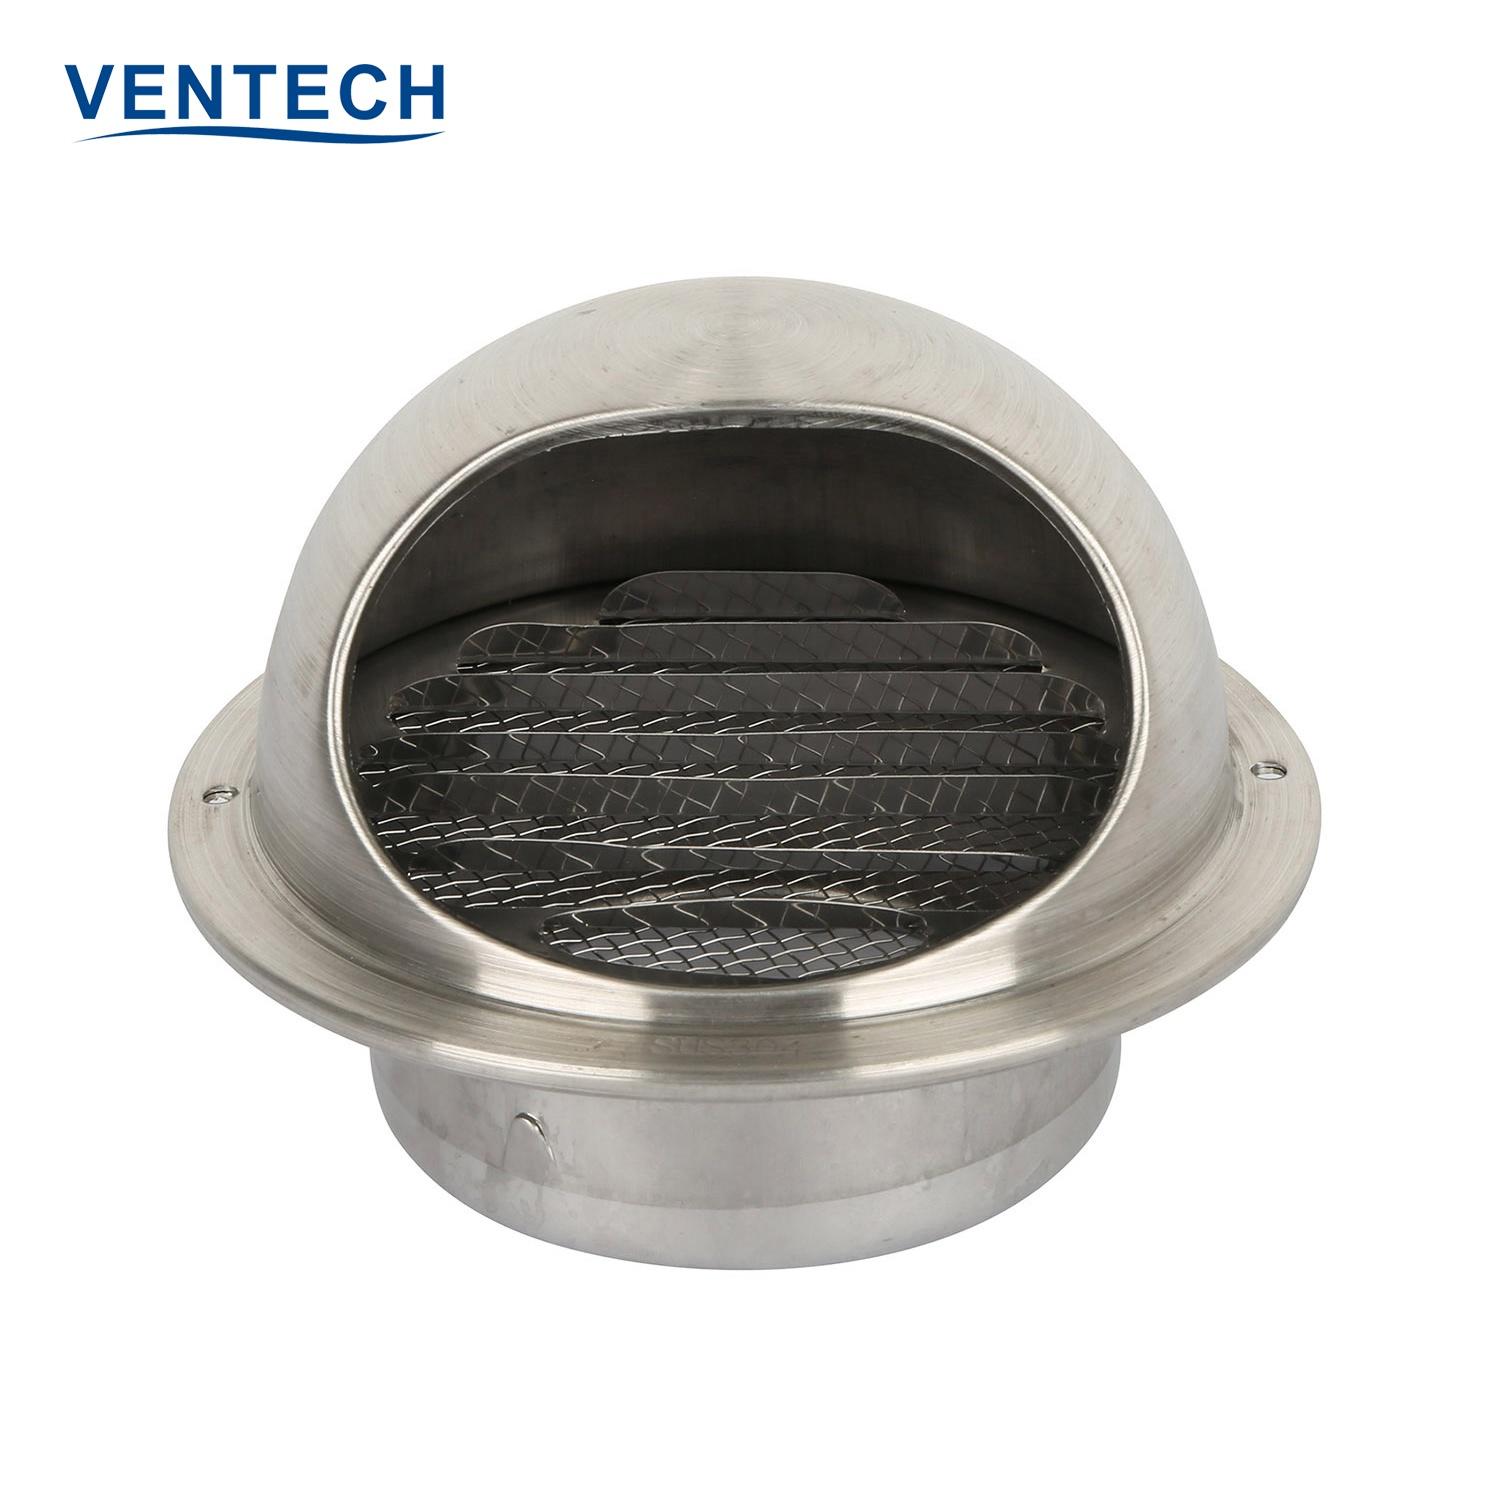 VENTECH Hvac System Stainless Steel Louvers And Vents Air Conditioner  Ball Weather Louver For Ventilation